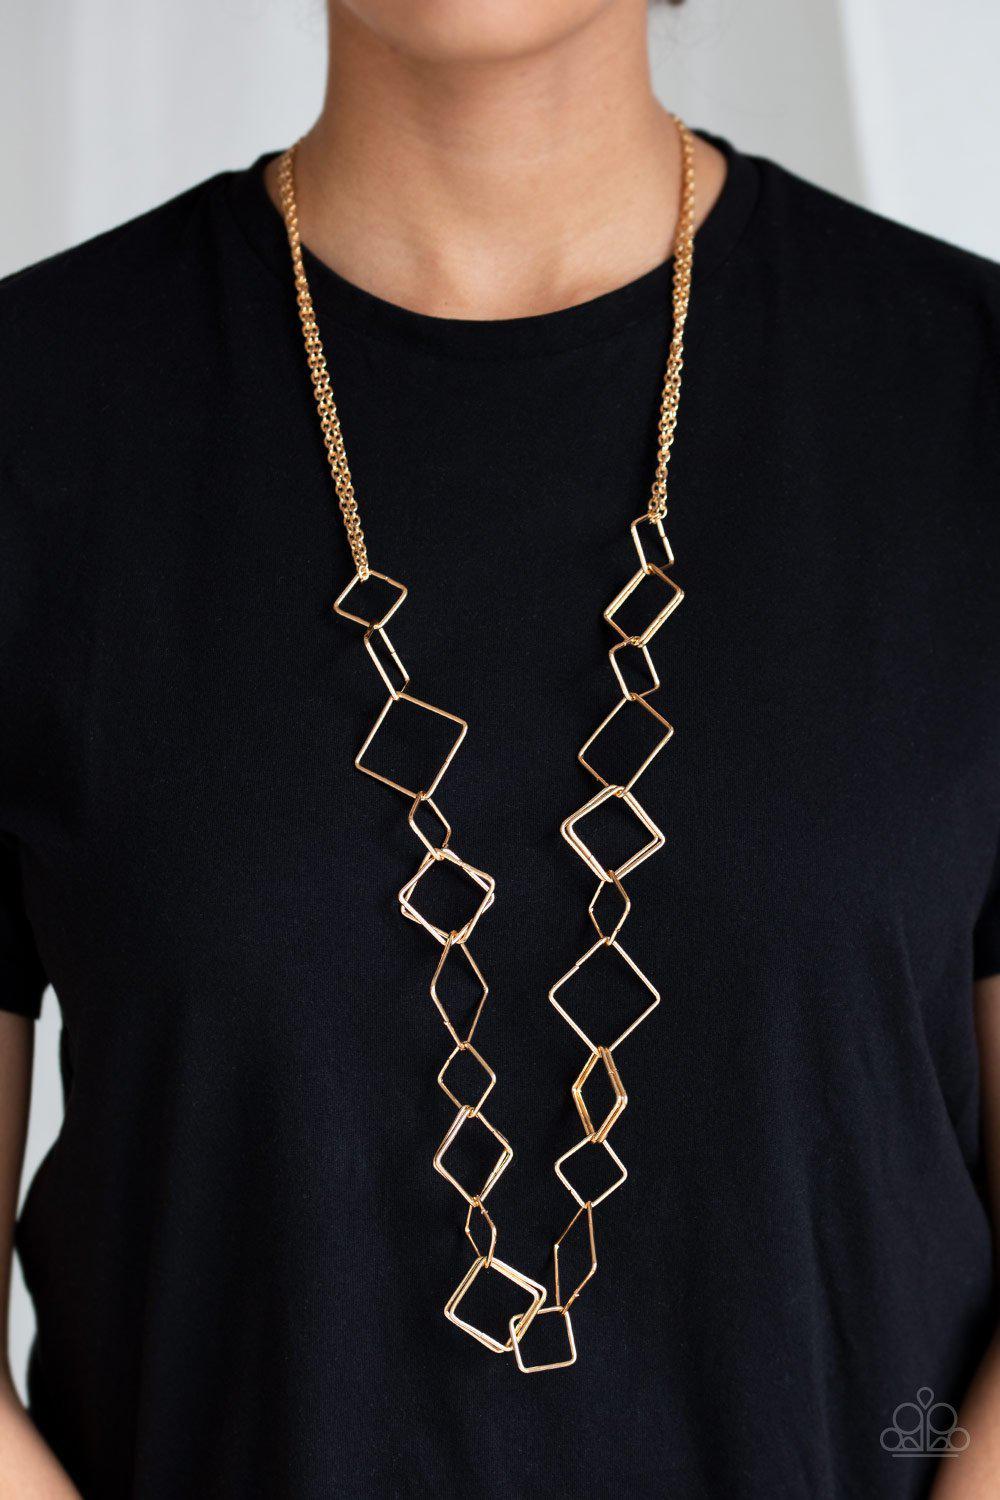 Backed Into A Corner Gold Necklace - Paparazzi Accessories-CarasShop.com - $5 Jewelry by Cara Jewels